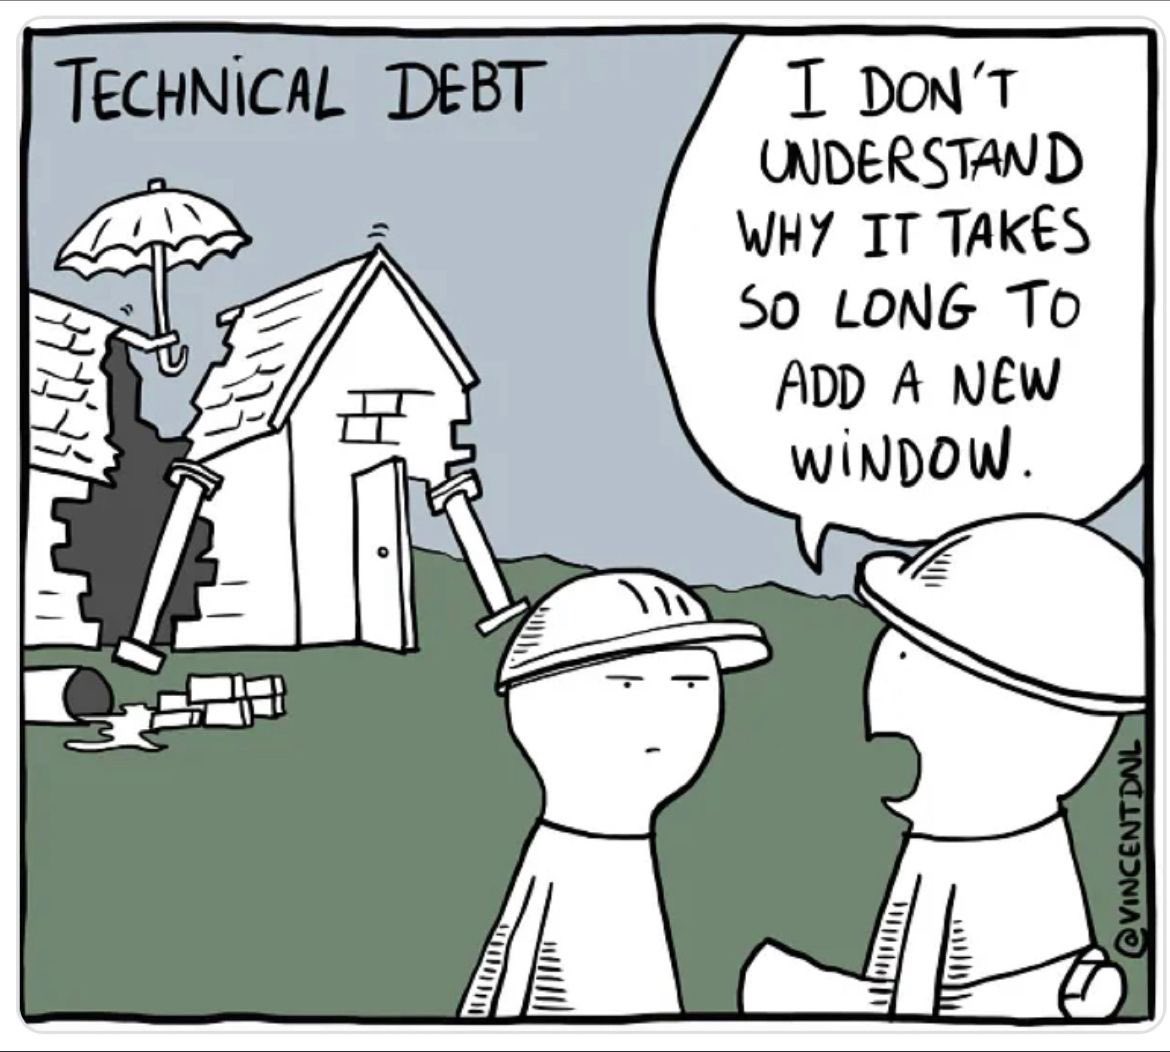 Hits too close to home. #technicaldebt